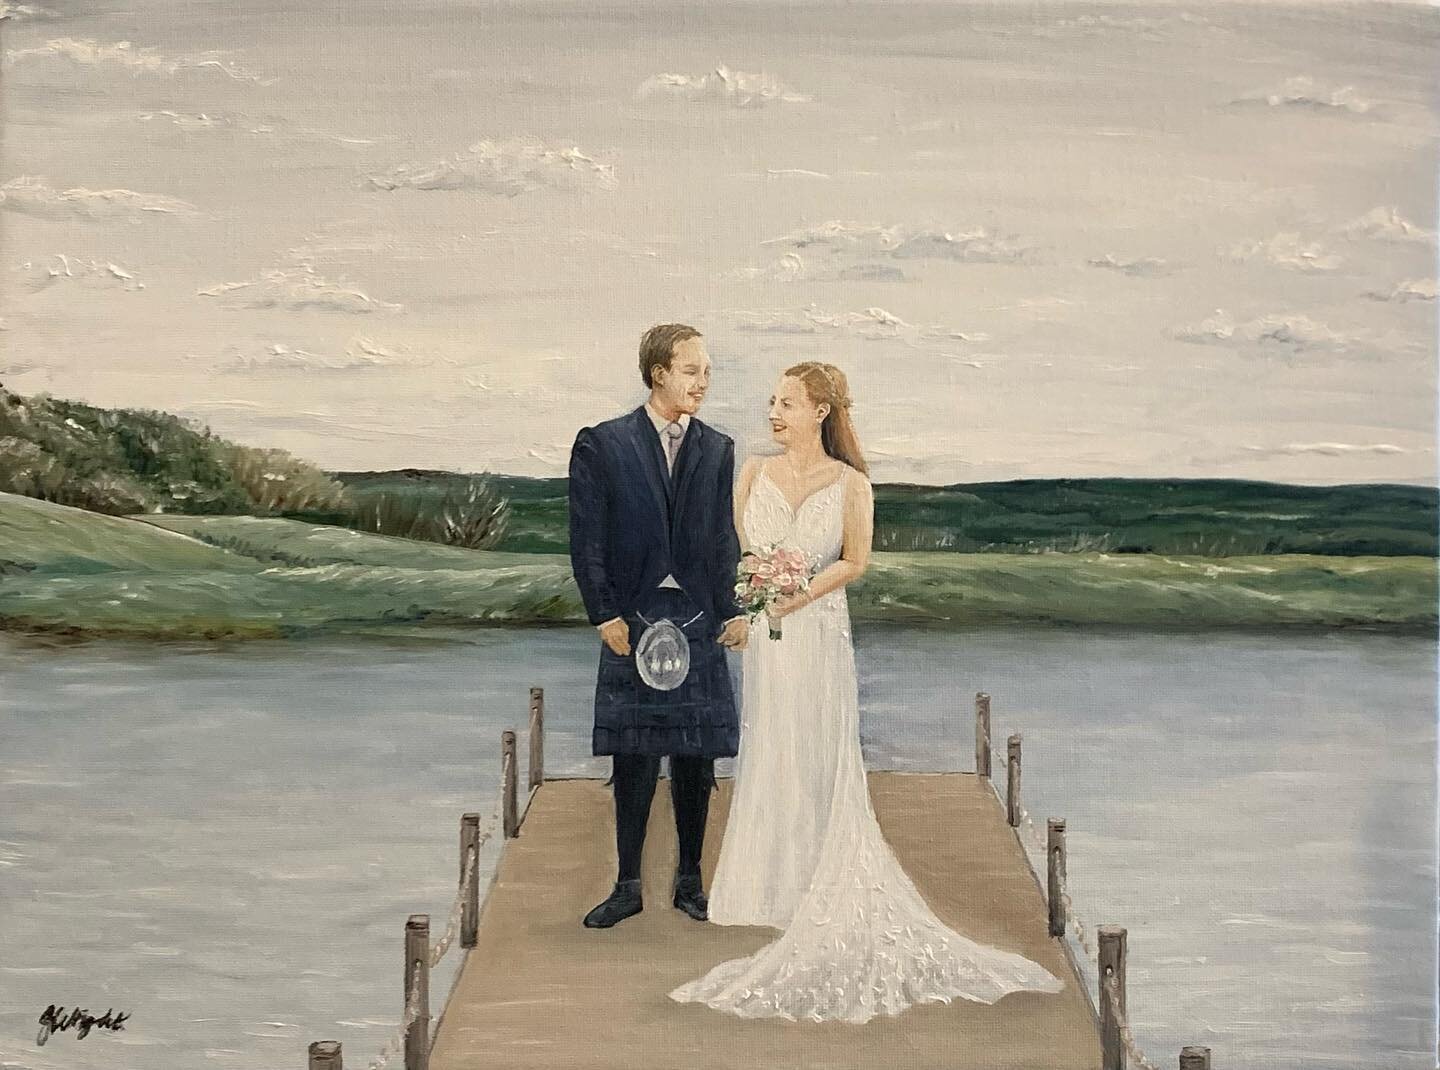 &ldquo;Love on the Loch&rdquo;

- 12x16 inches 
- Oil on canvas
 
Commissioned portrait for a bride  from her best friend 👯&zwj;♀️

I have had a lot going on over winter so I&rsquo;m very behind on posting! Sorry! 

Here is the completed piece I shi